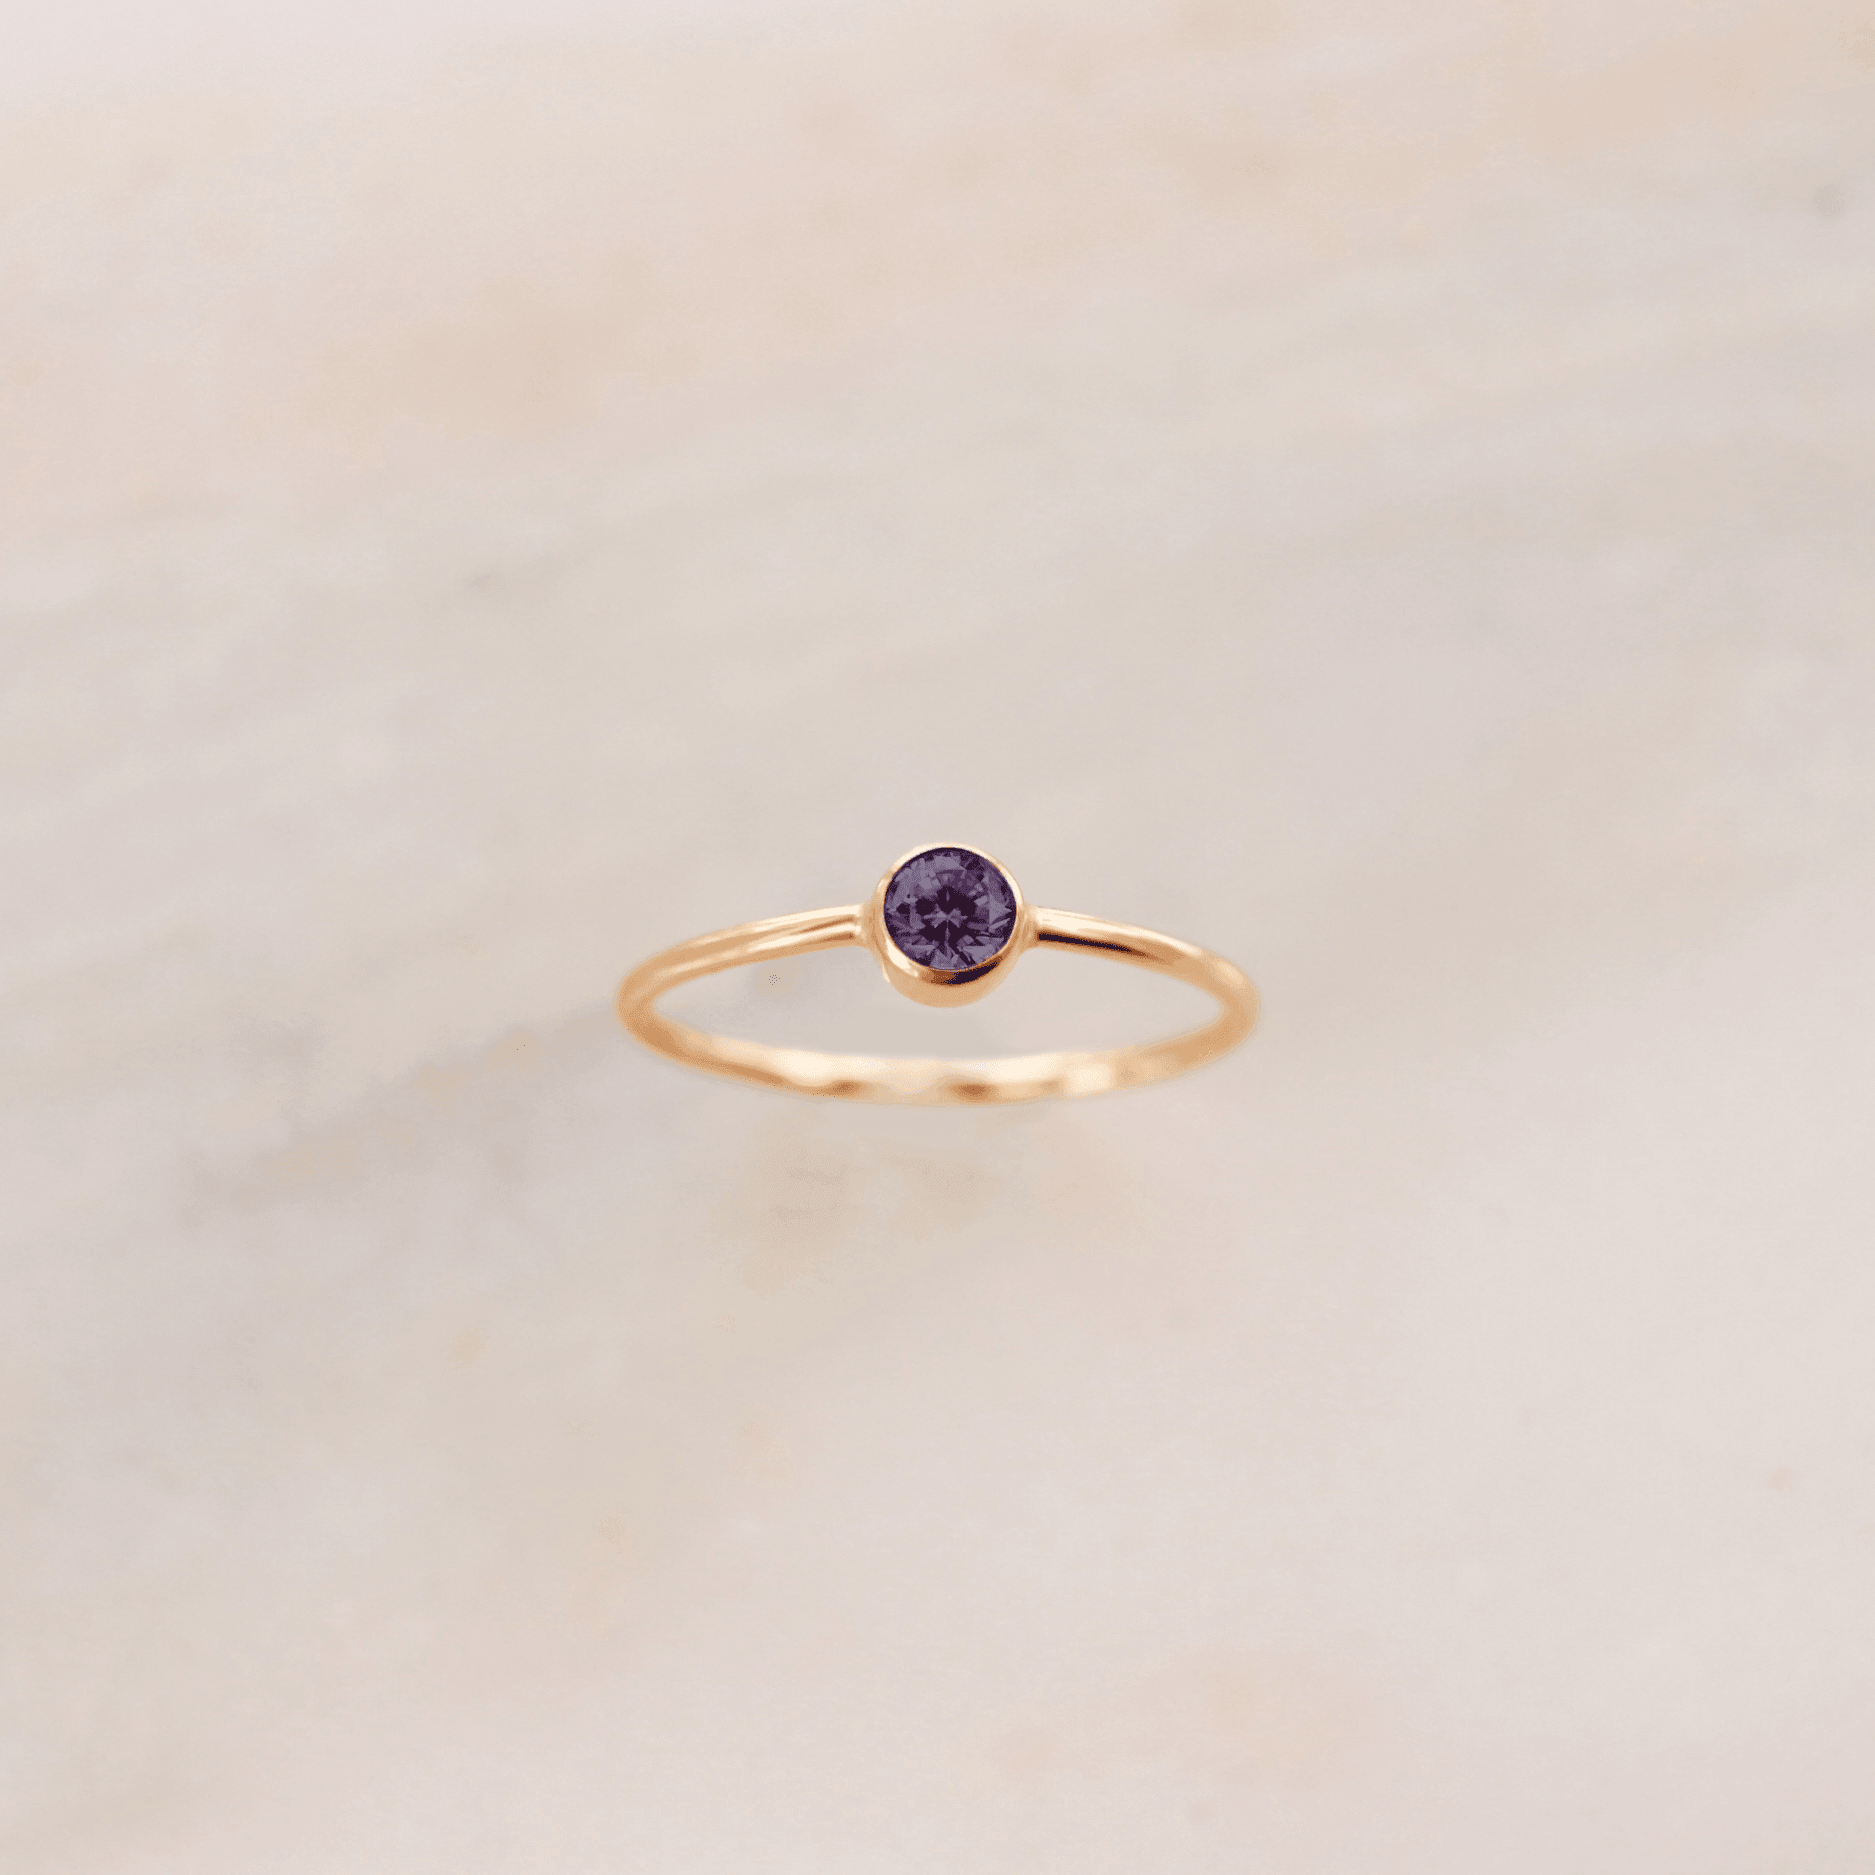 February Birthstone Ring ∙ Amethyst - Nolia Jewelry - Meaningful + Sustainably Handcrafted Jewelry